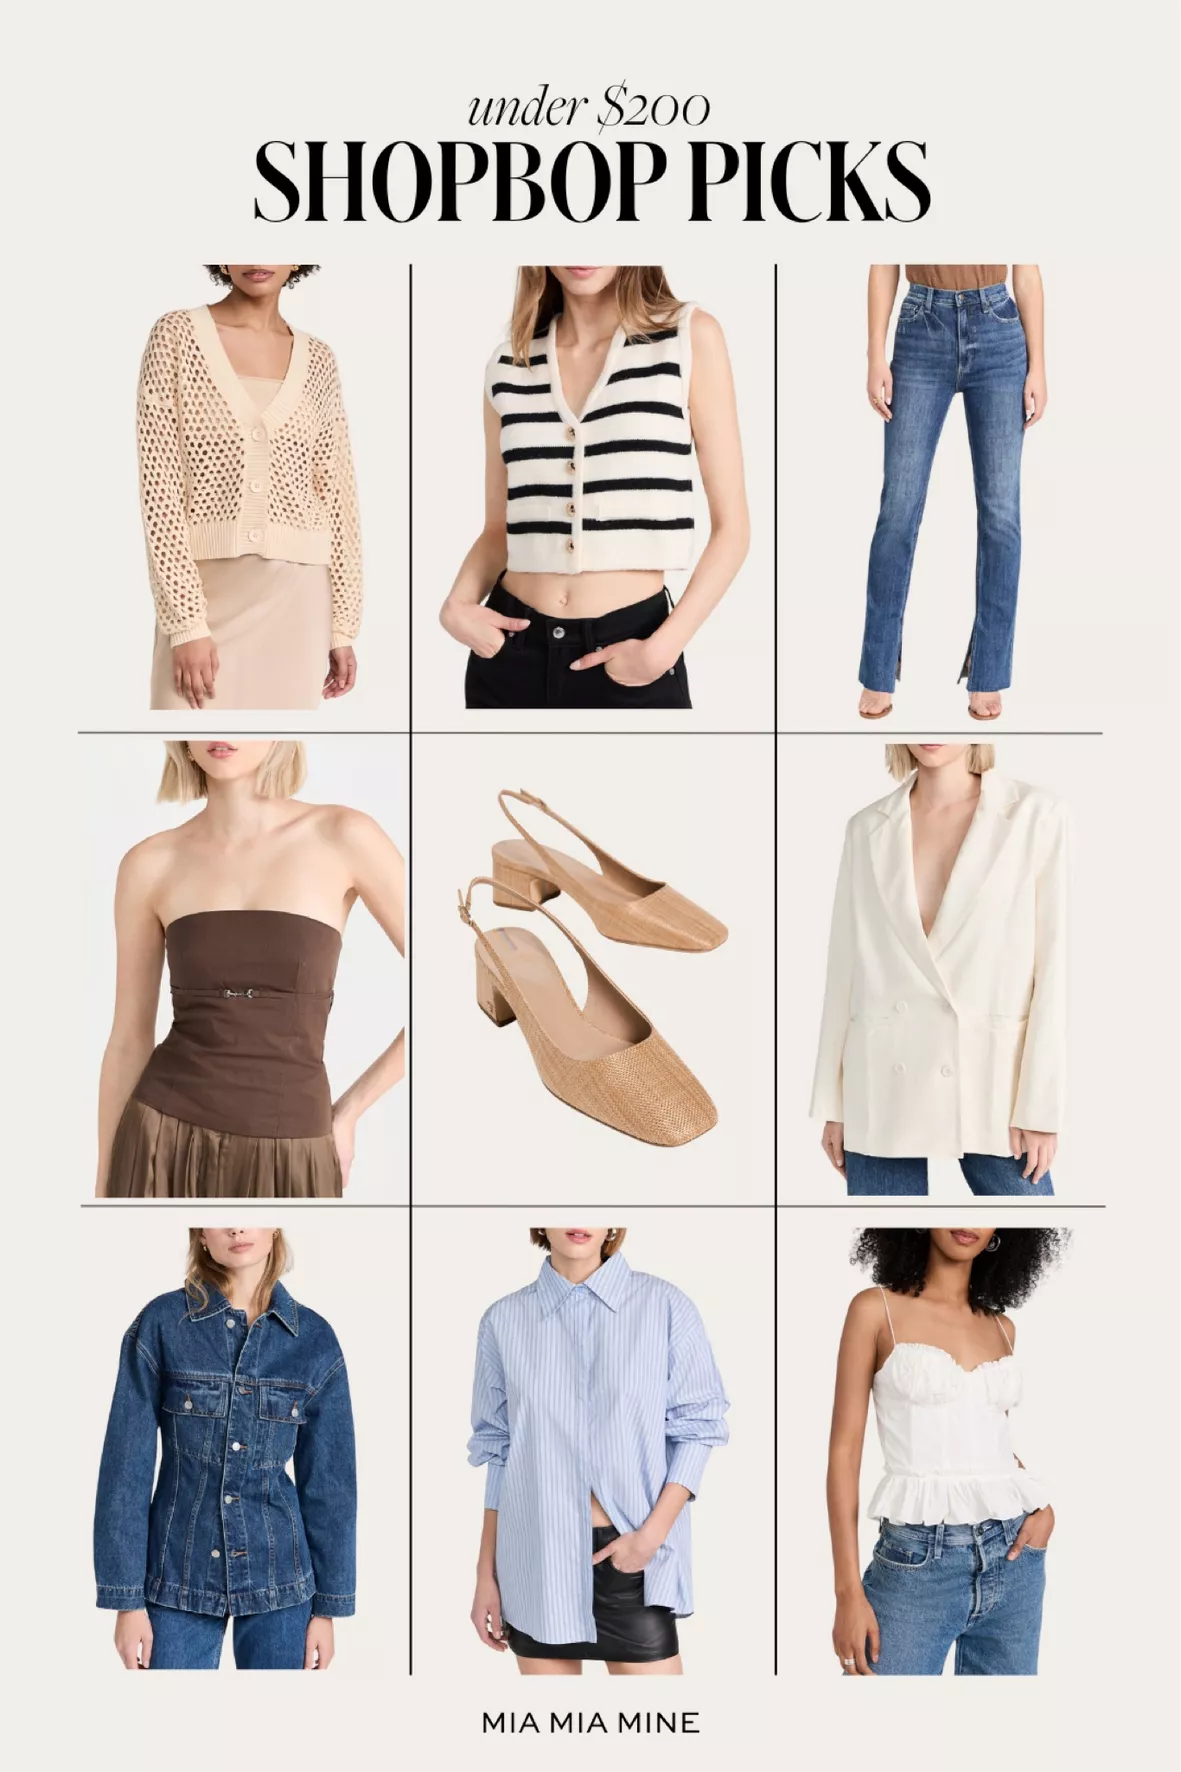 Spring Outfit Ideas Under $100